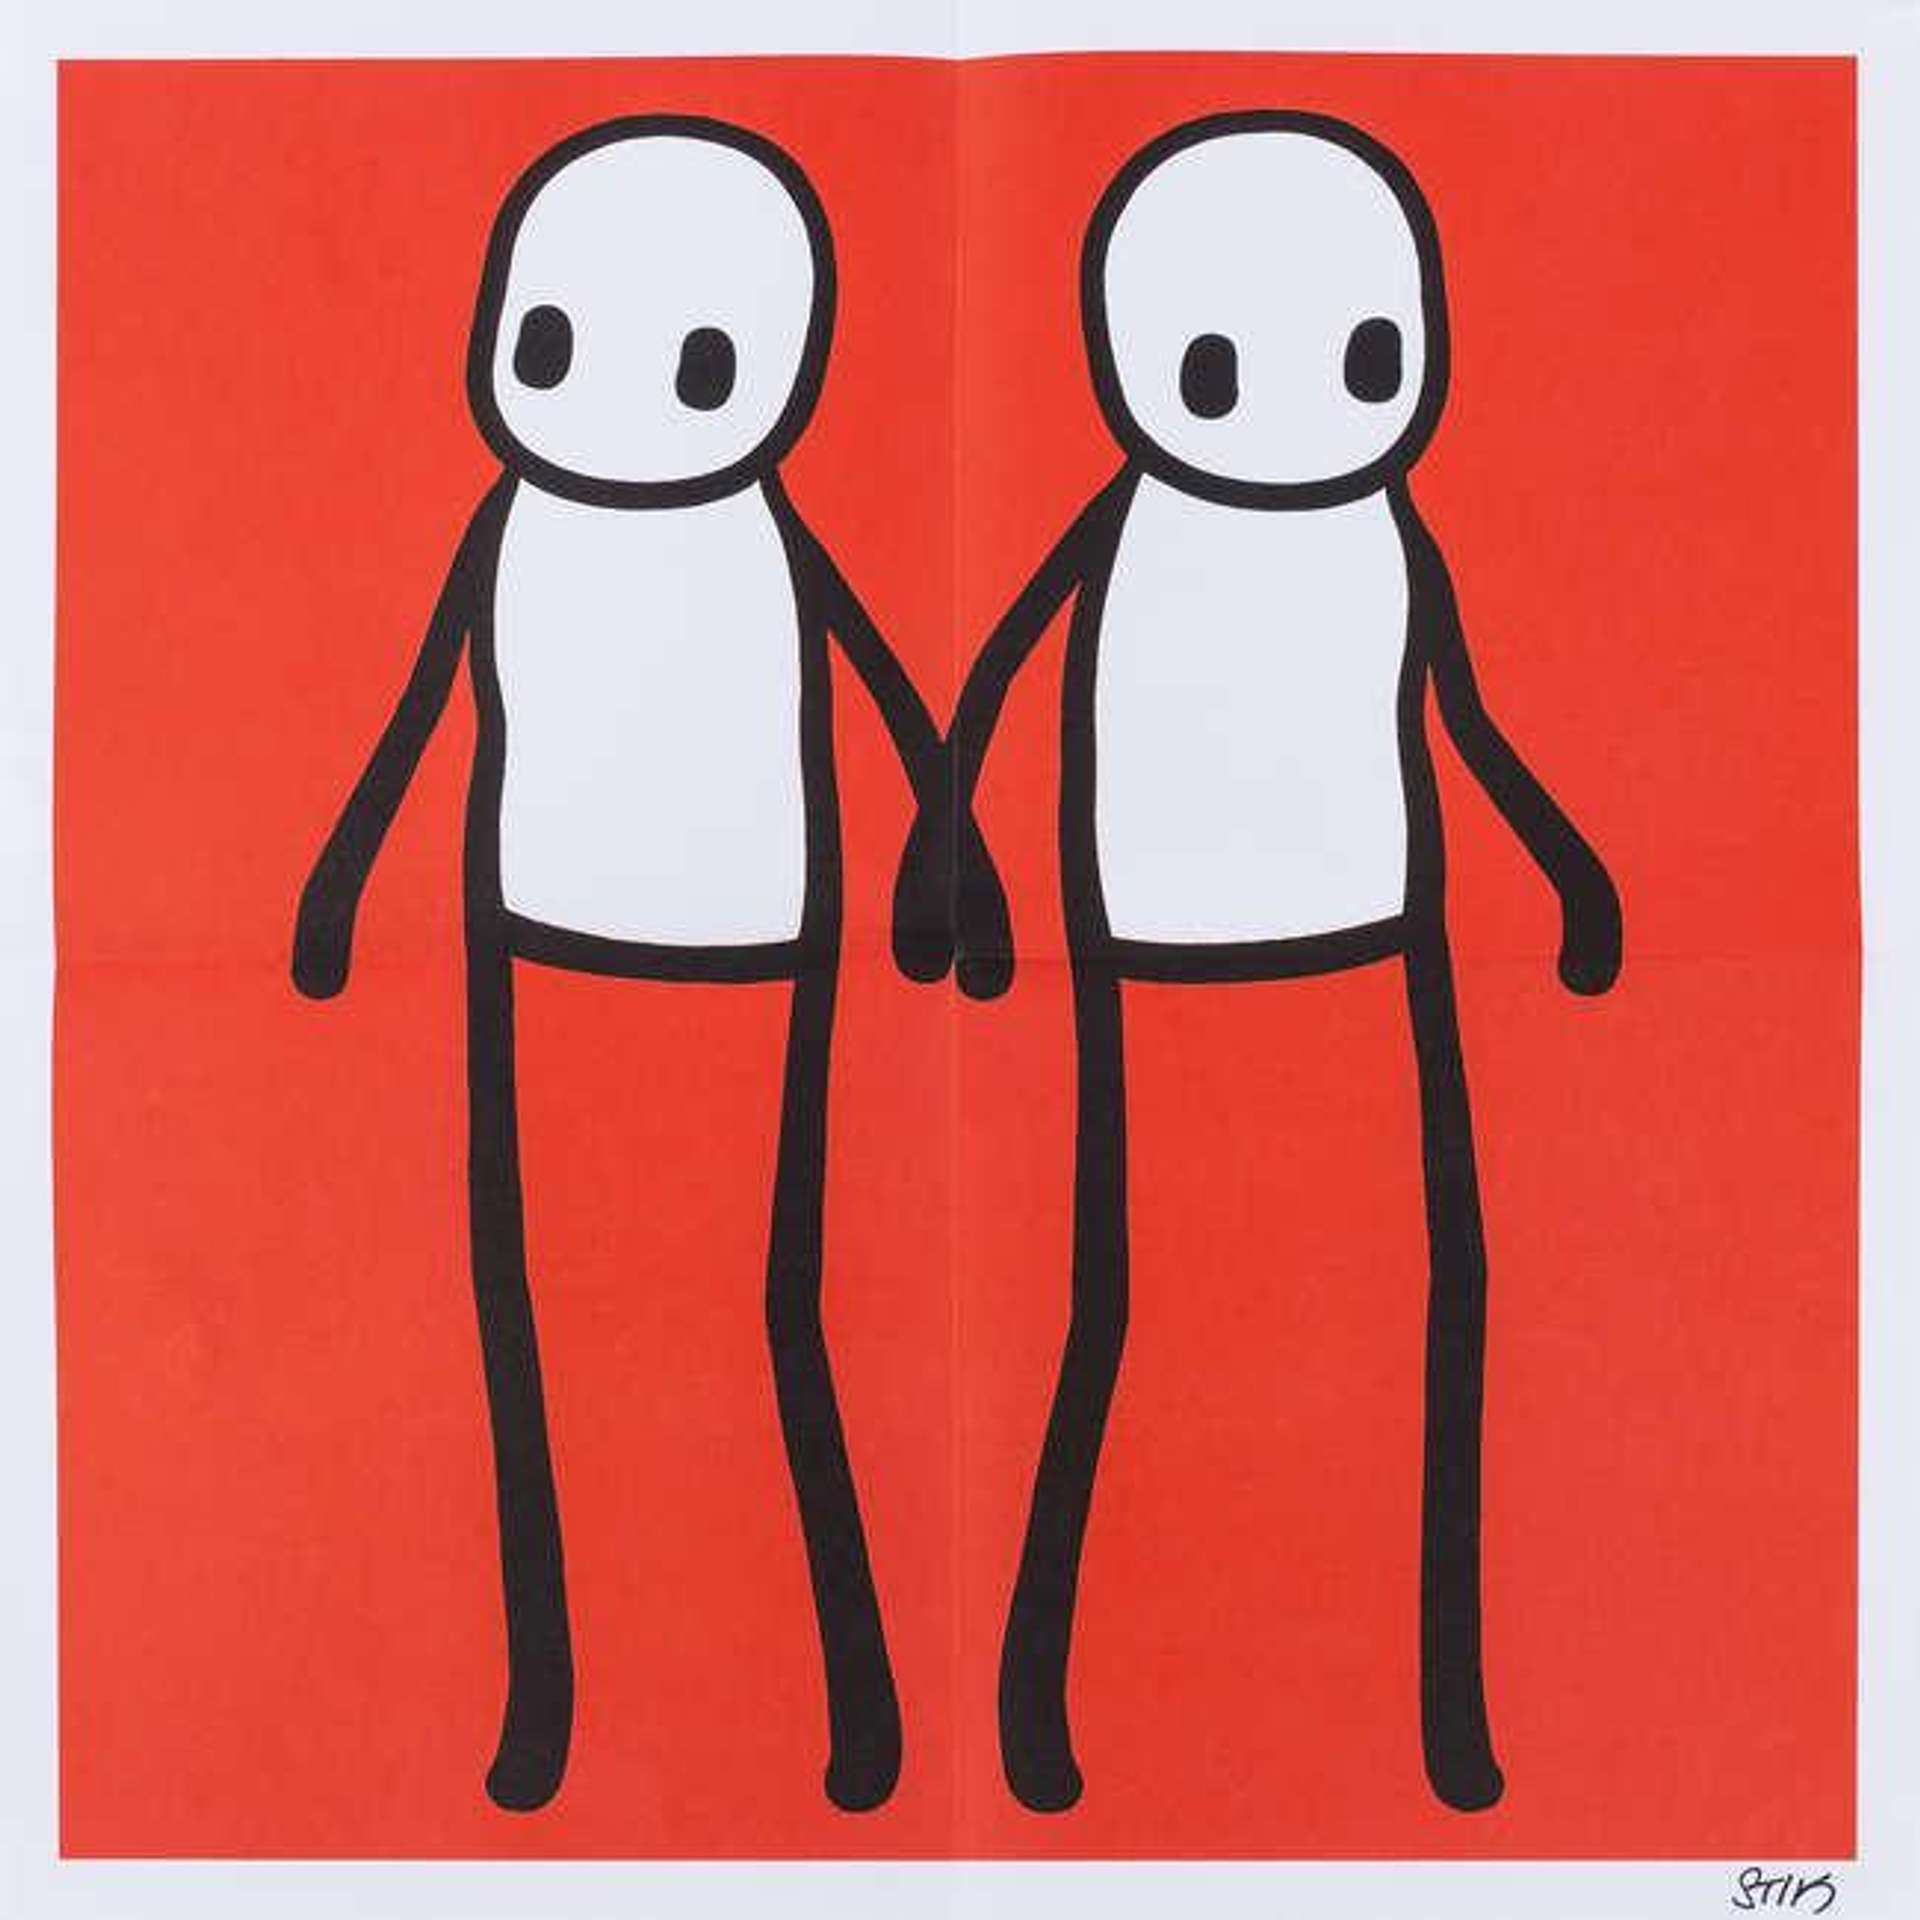 Large-scale image of two stick figures holding hands in front of a red background